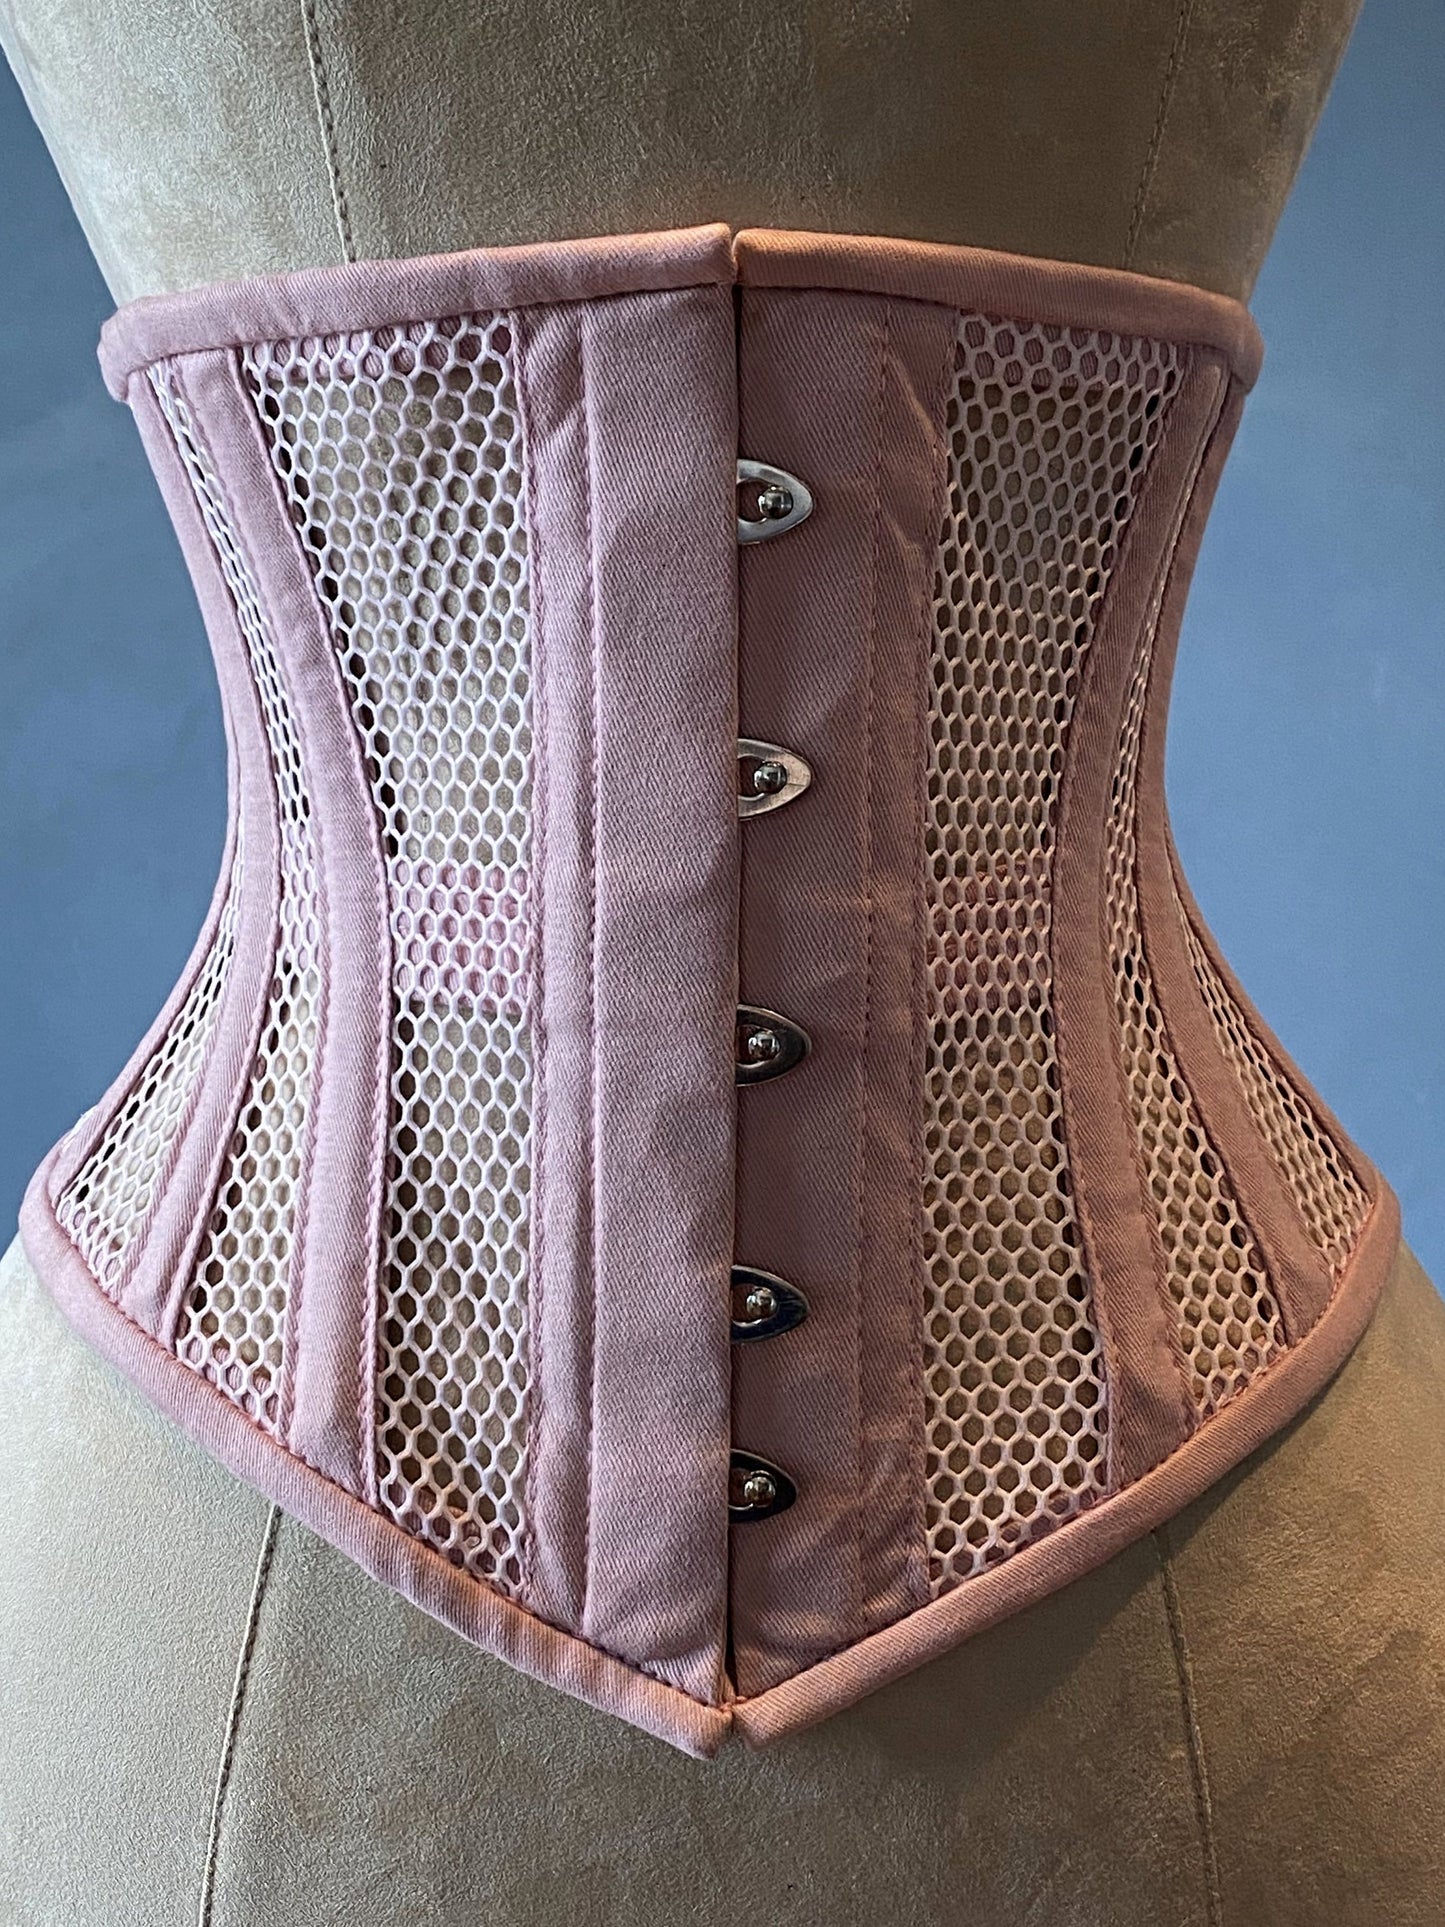 Tight Lacing White Underbust Corset in Victorian Vintage Style, Steelboned  Waist Training Cincher Corset for Under Dress, Shapewear Trainer -  UK